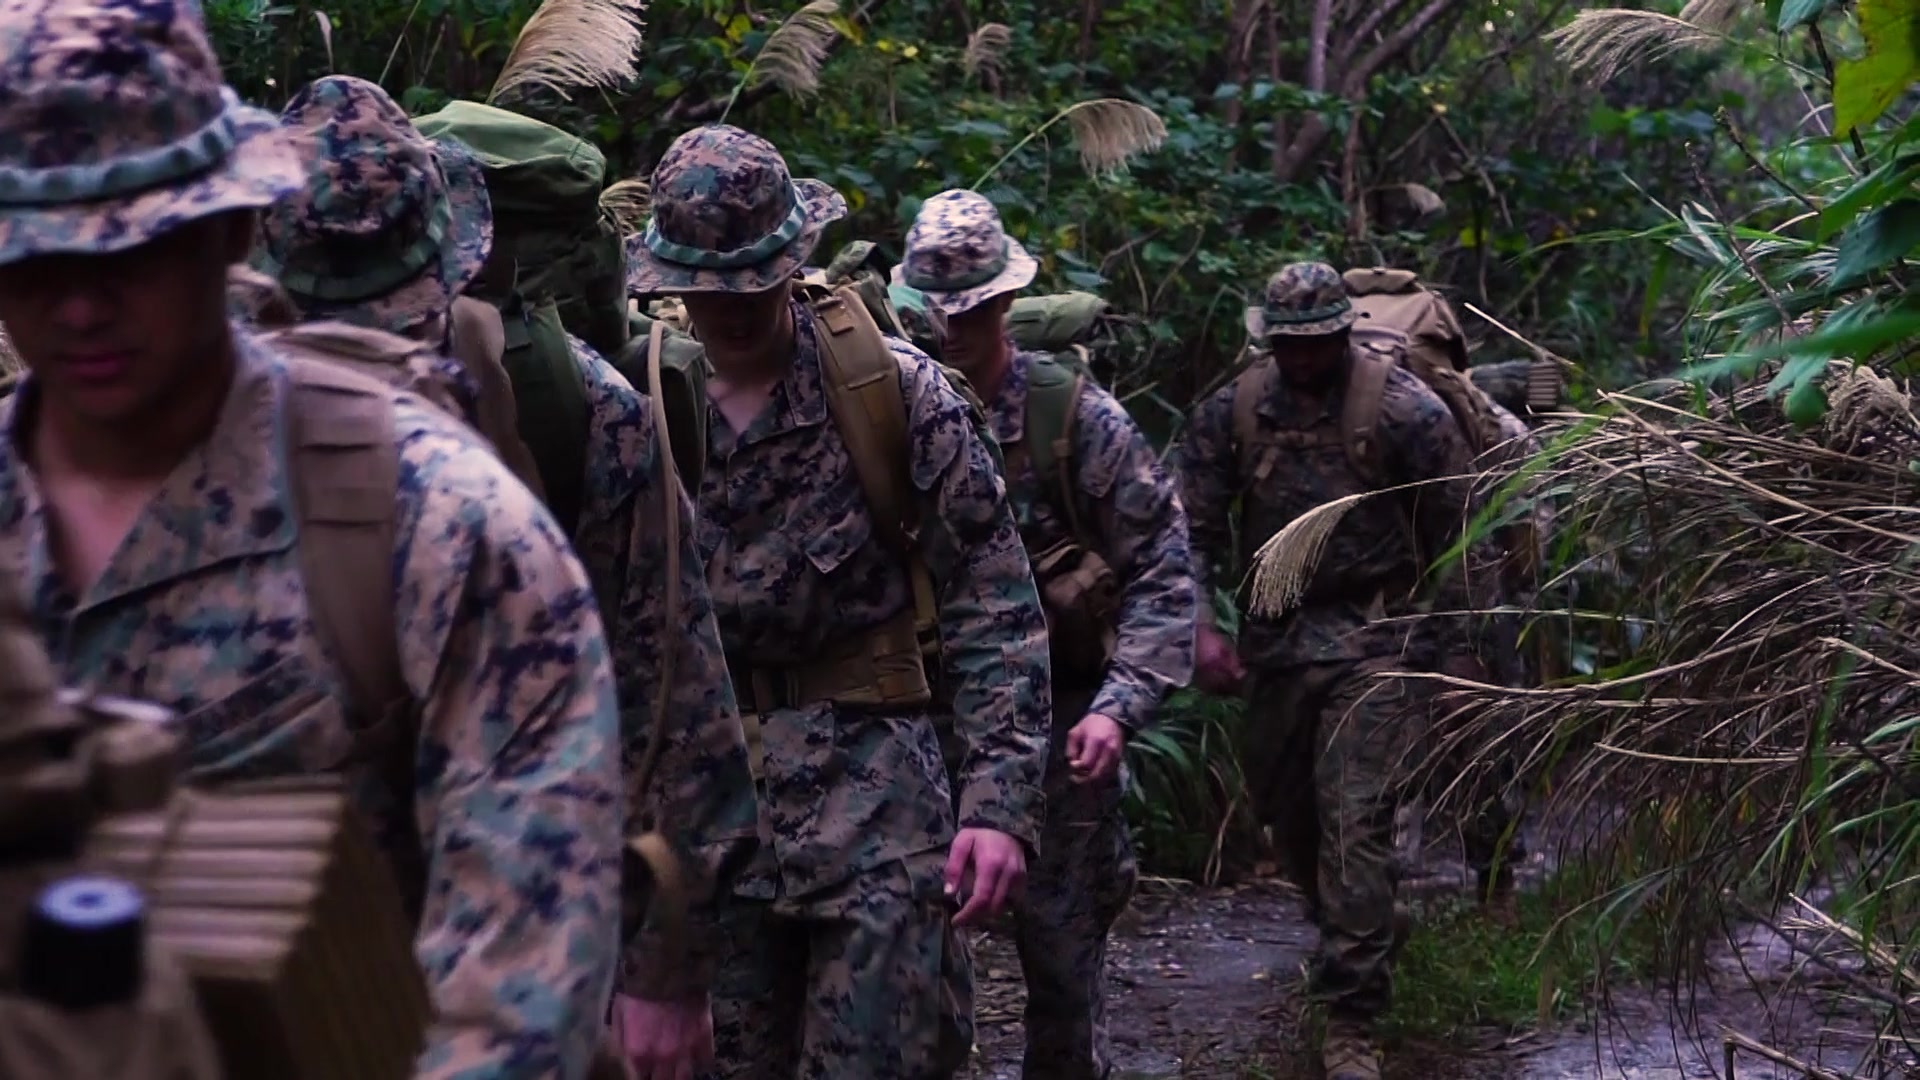 U.S. Marines with 3d Marine Division, conduct the Jungle Survival Course at the Jungle Warfare Training Center on Camp Gonsalves, Okinawa, Japan, Dec. 10, 2020. The course focuses on jungle survival skills, increasing the Marine’s ability to operate in any environment throughout the Indo-Pacific region. (U.S. Marine Corps video by Lance Cpl. Hassanen Attabi)